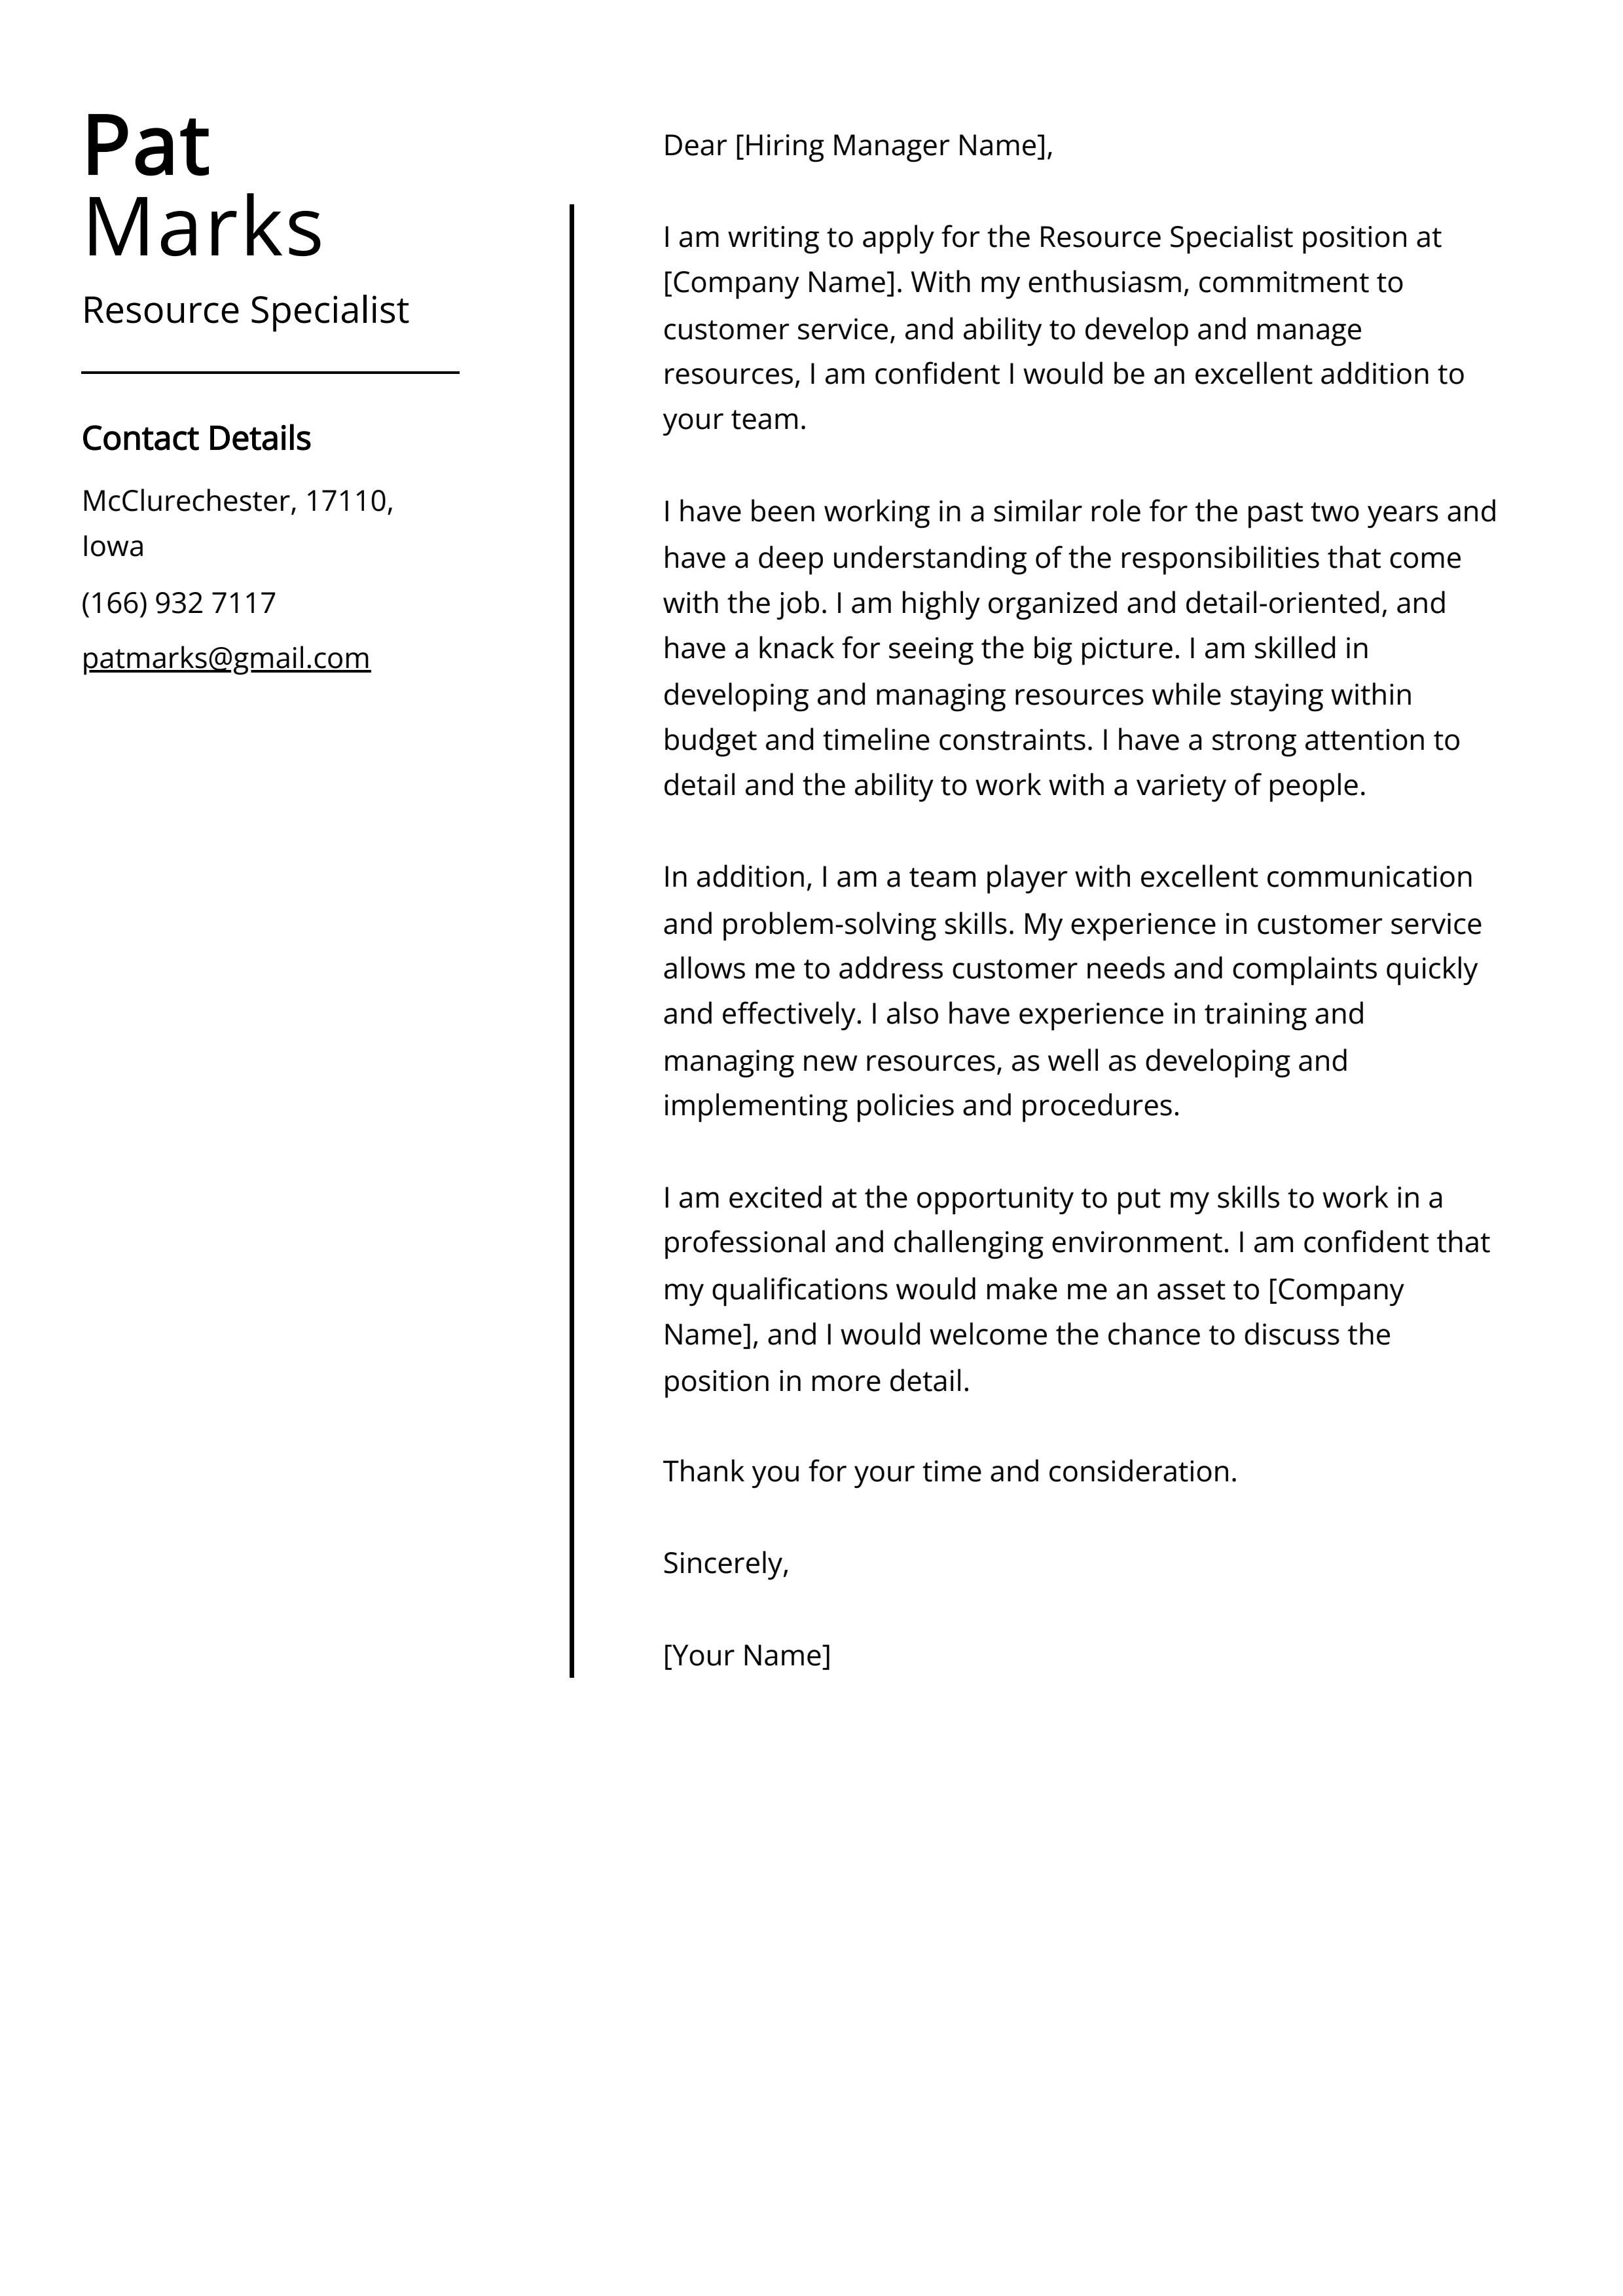 Resource Specialist Cover Letter Example